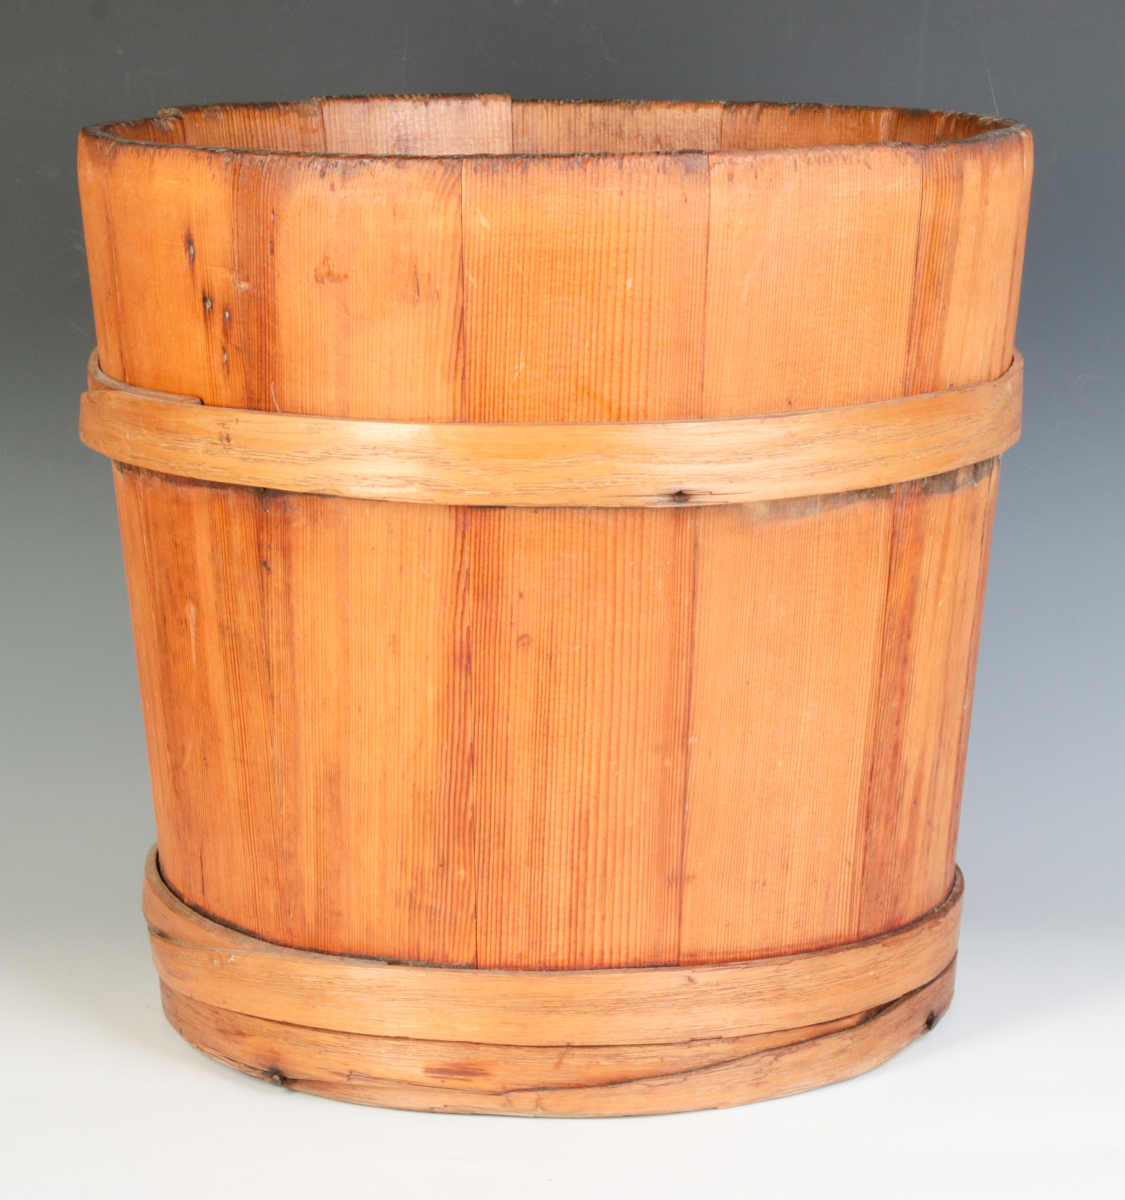 A 19TH CENTURY STAVE BUCKET WITH WOOD BANDS